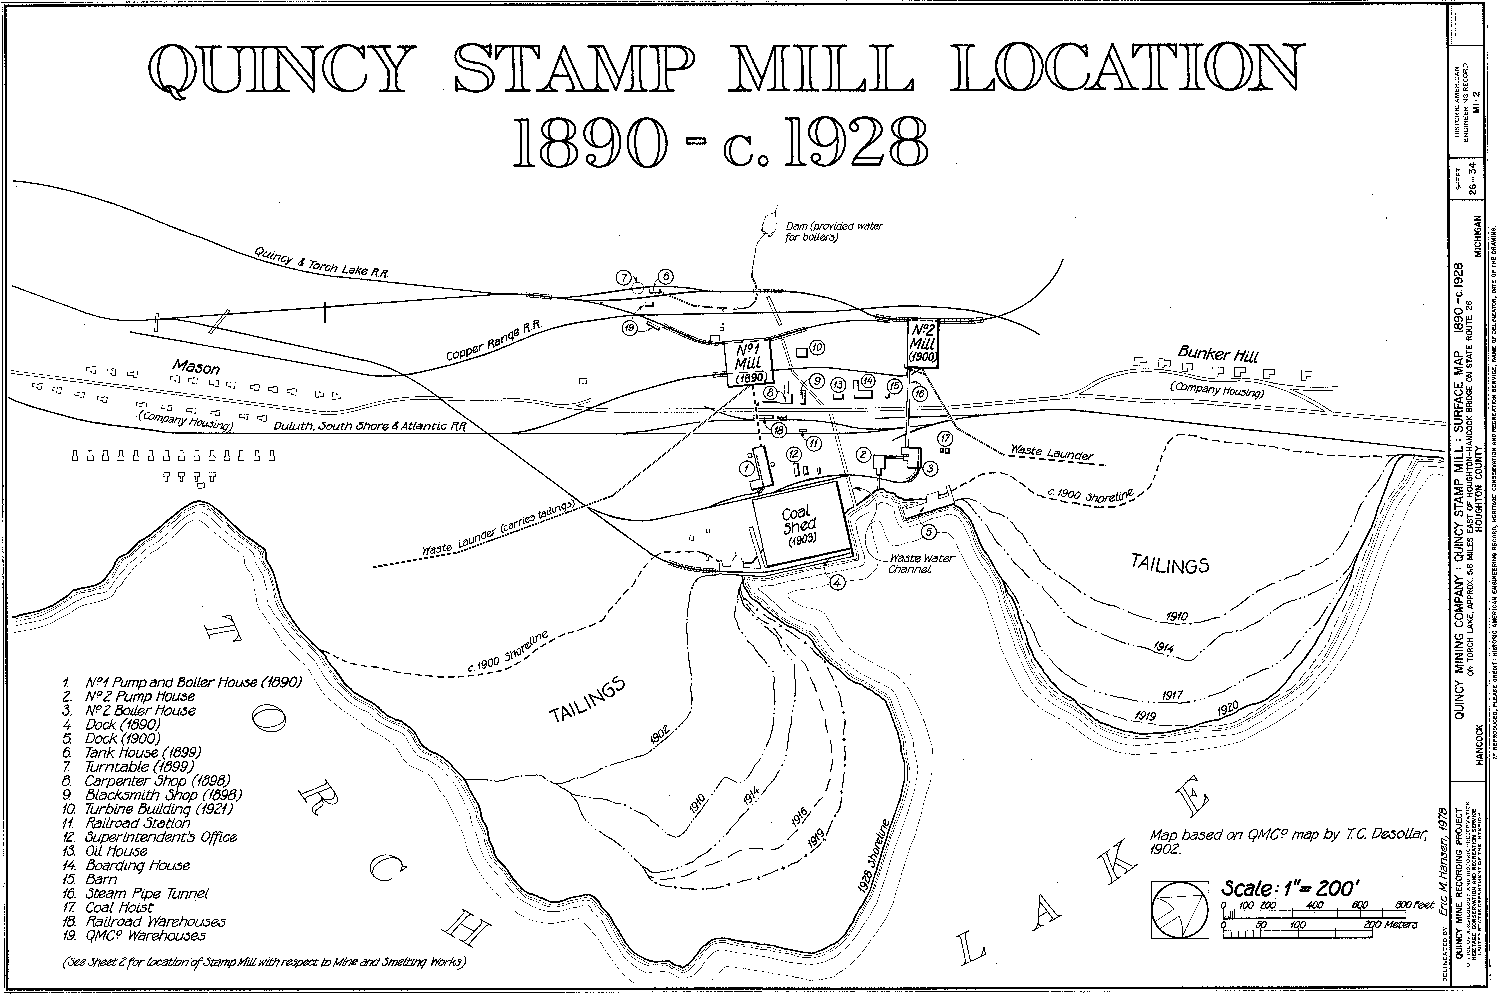 Quincy Stamp Mill Location 1890